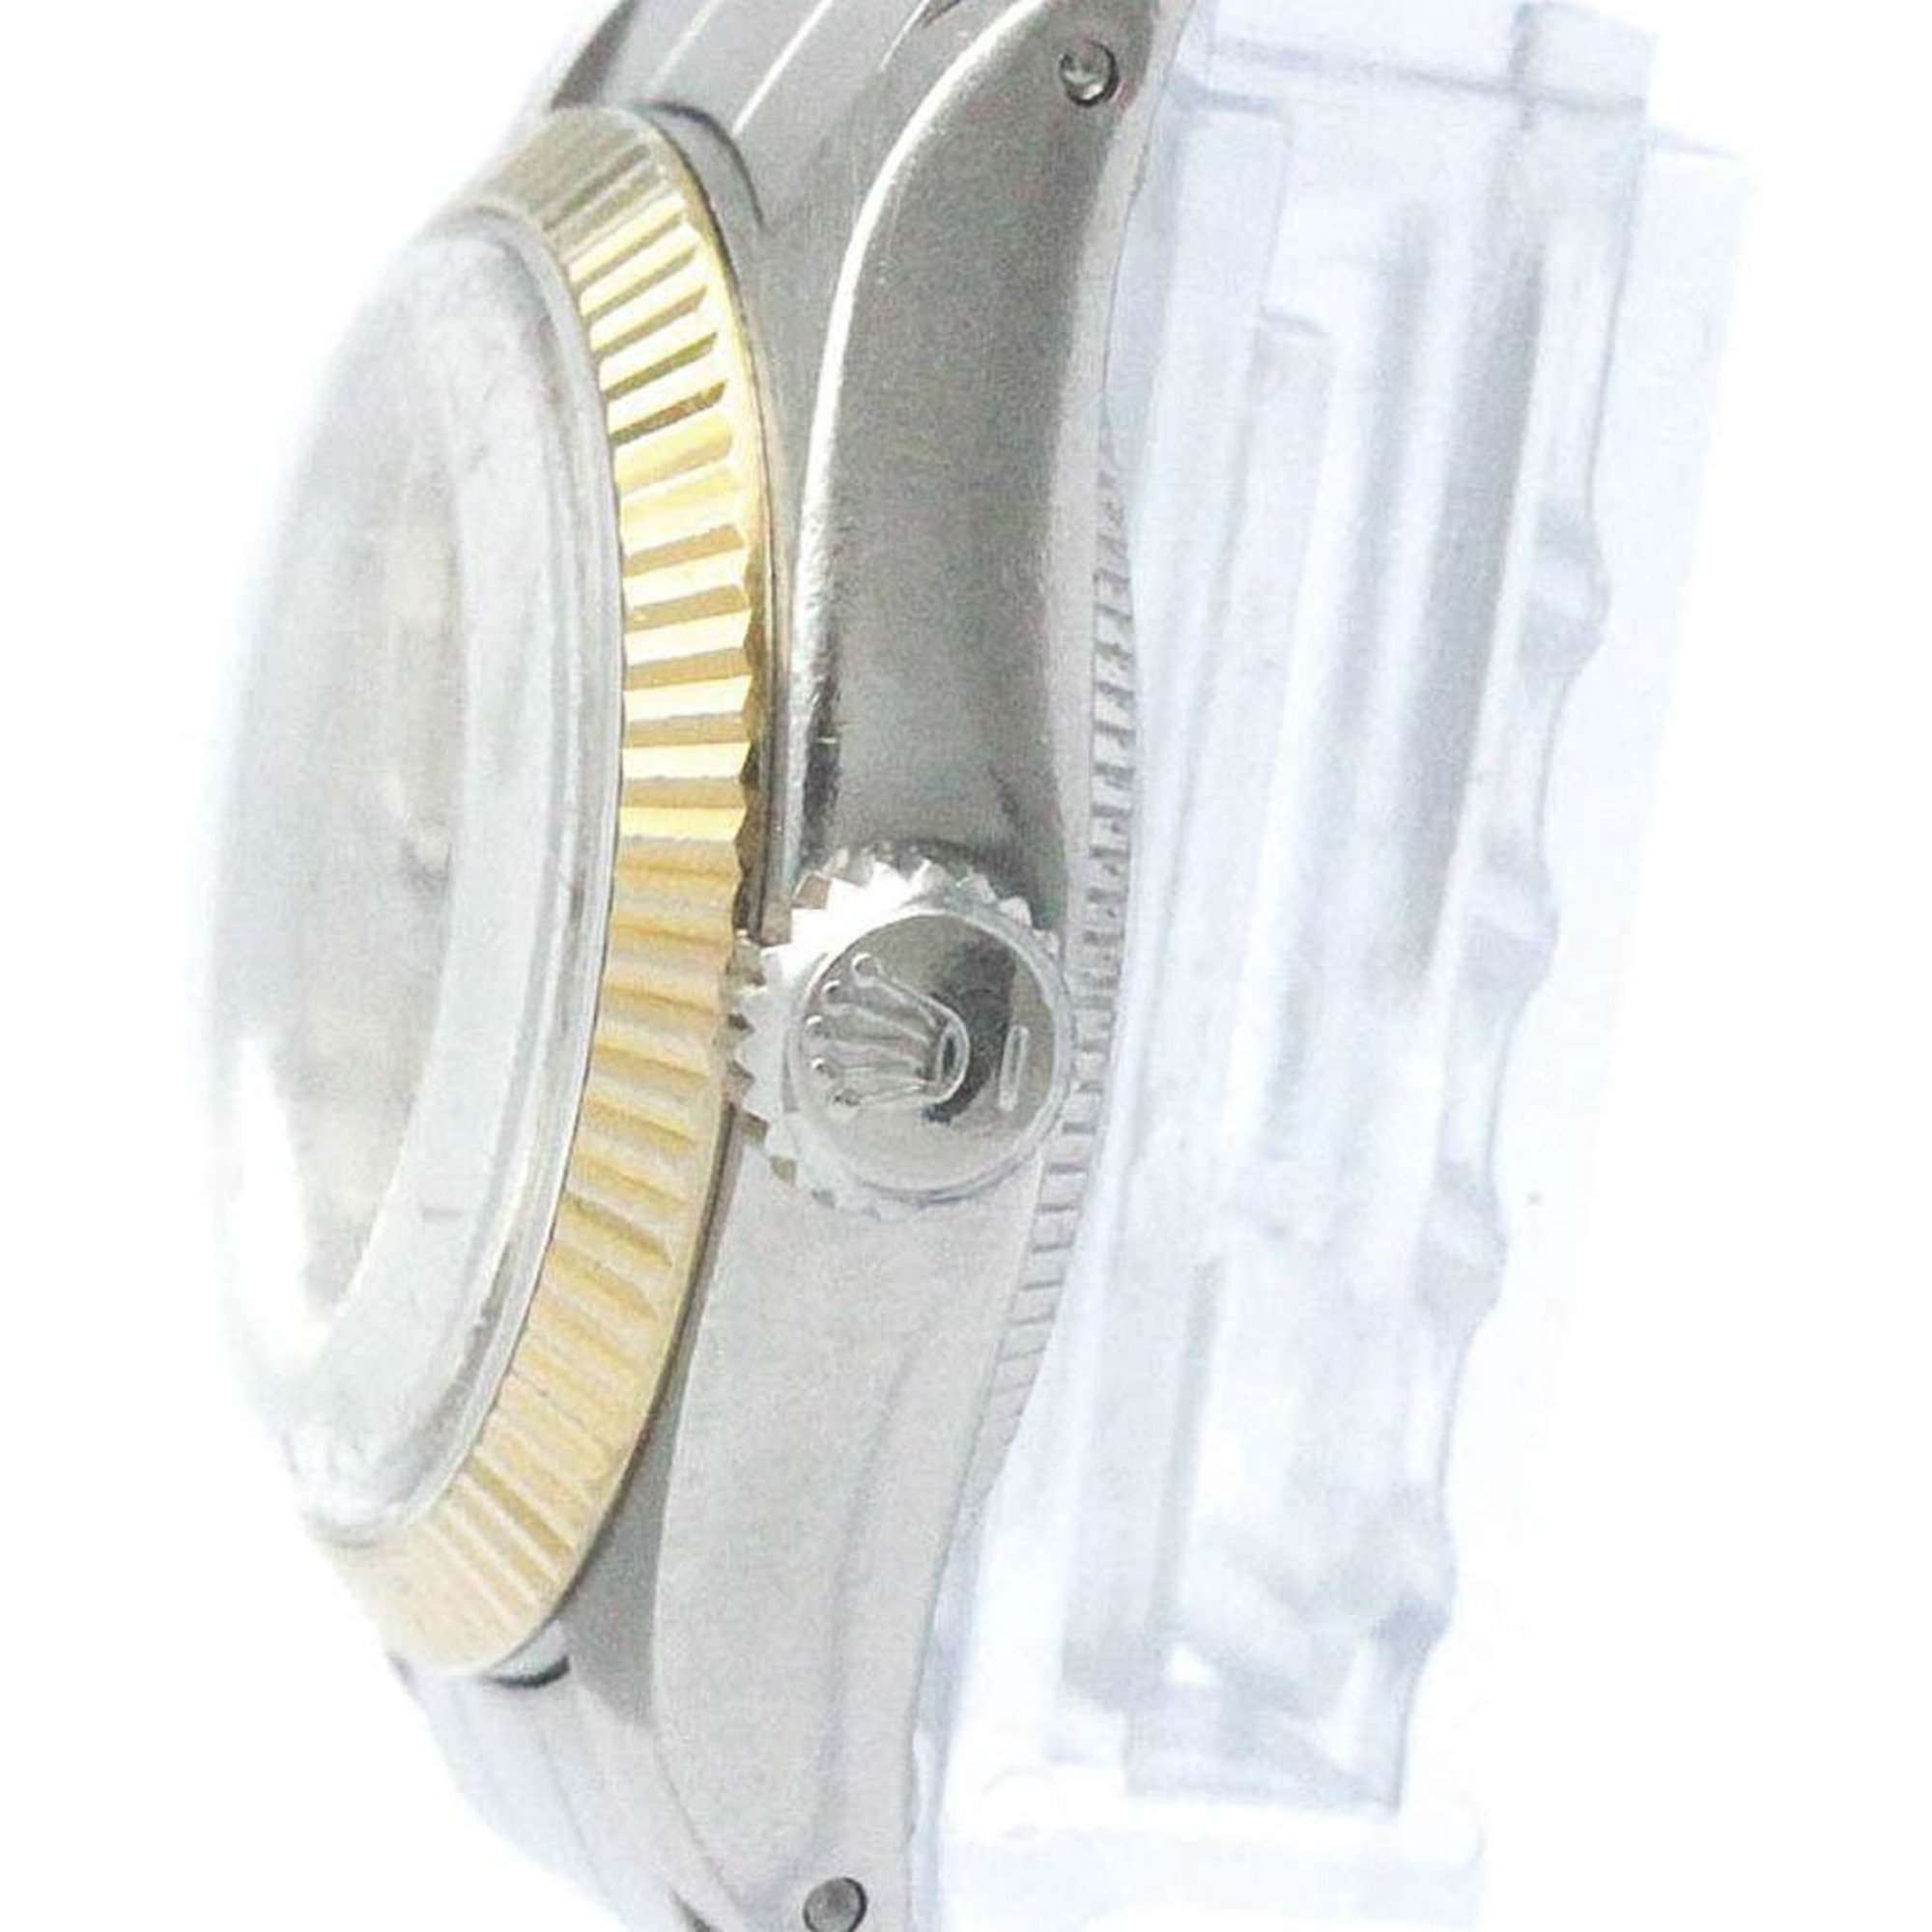 Vintage ROLEX Oyster Perpetual 6719 White Gold Steel Ladies Watch BF565449